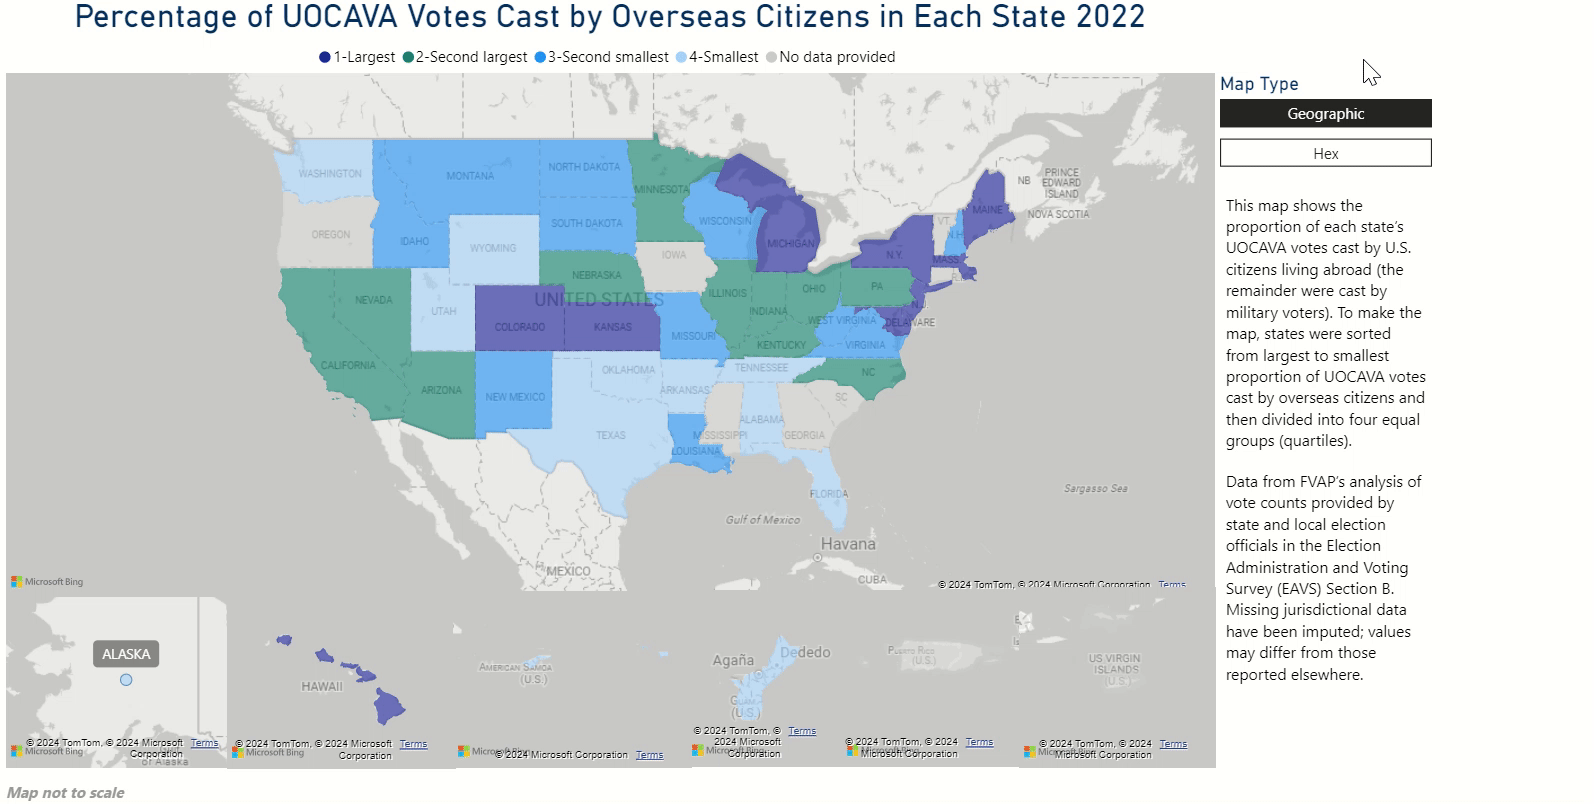 Image Percentage of Votes Cast by Overseas Voters by State